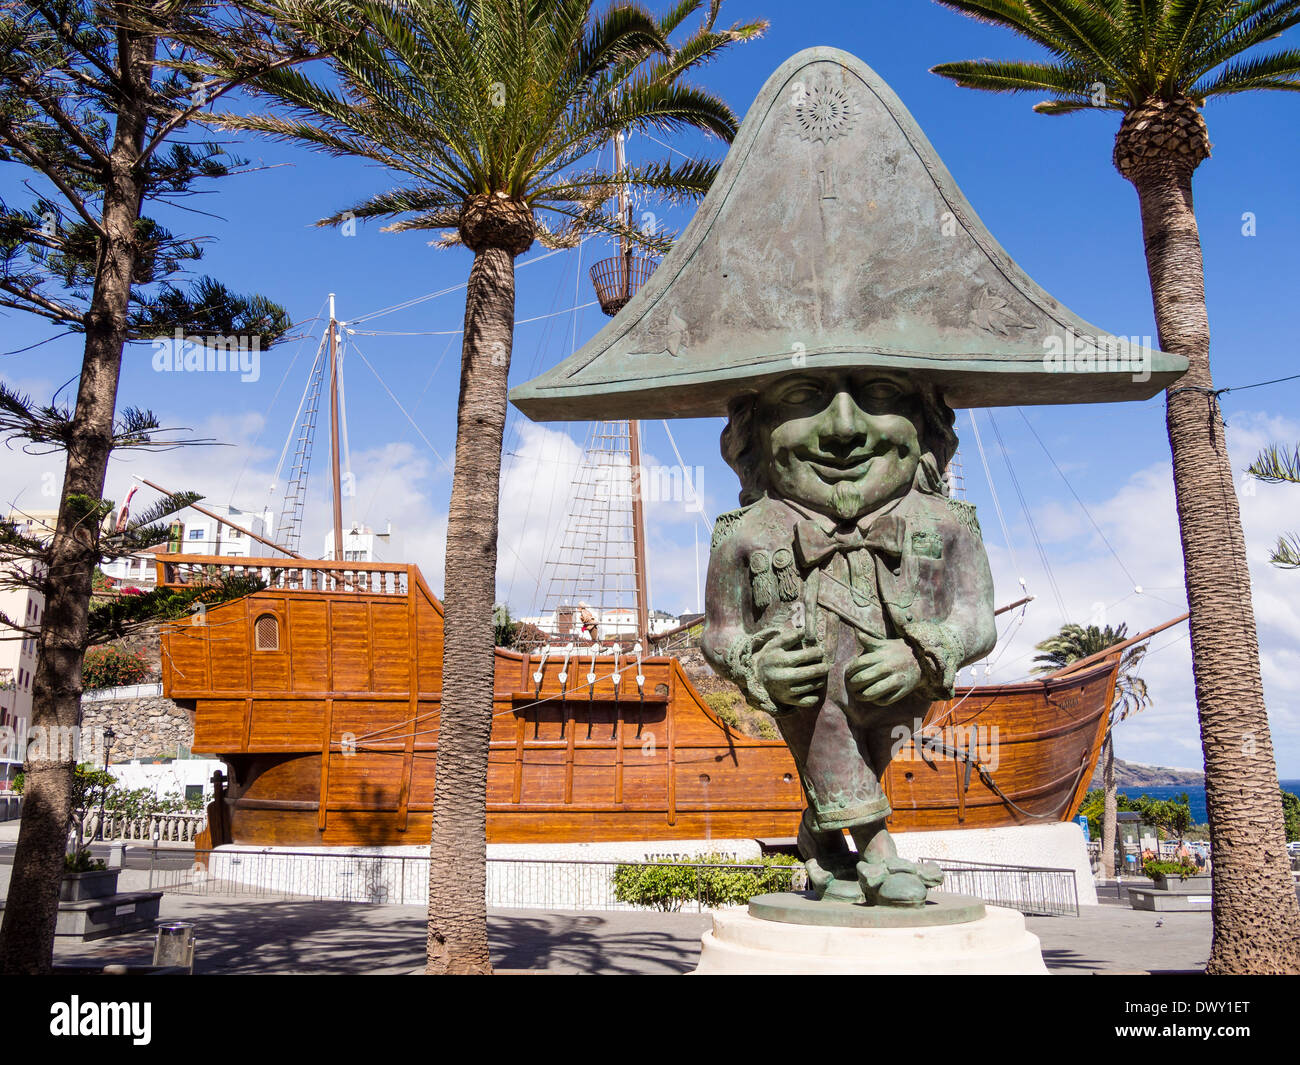 A statue of a dwarf (modelled on Napoleon) stands in front of the Museo Naval Santa Maria at Santa Cruz, La Palma, Canaries. Stock Photo